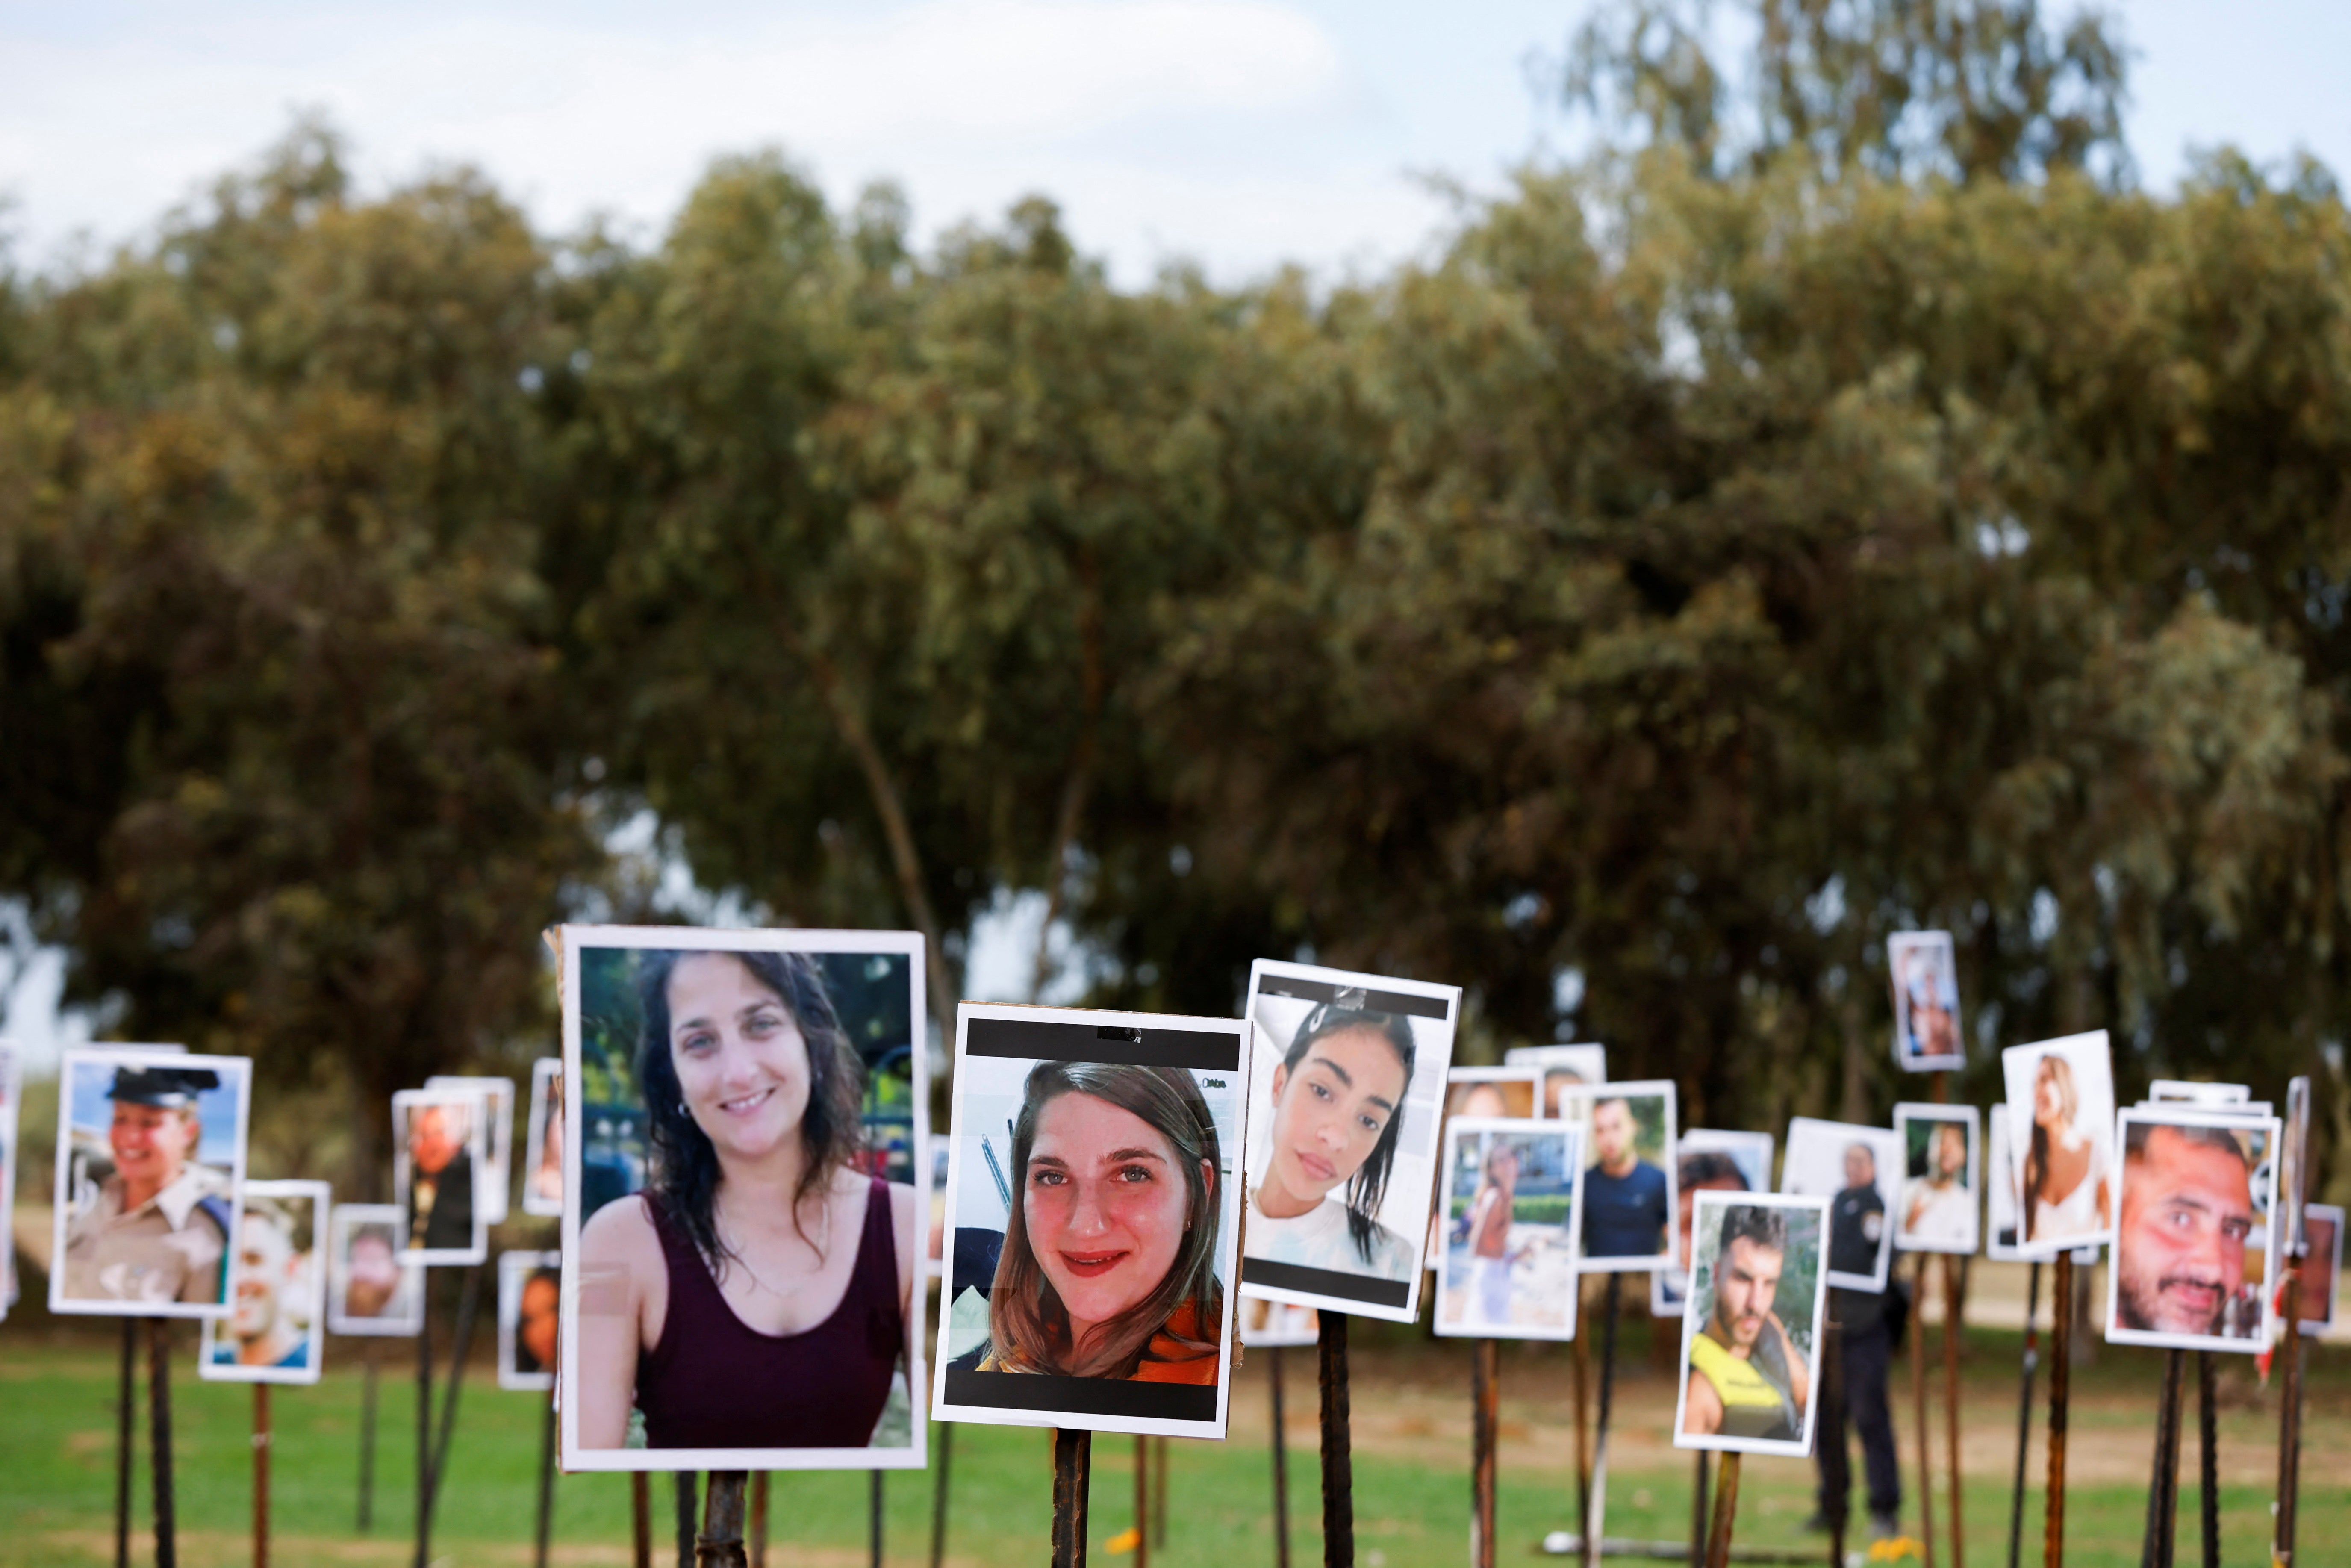 Pictures of the festivalgoers who were killed or kidnapped during the 7 October attack by Hamas gunmen from Gaza